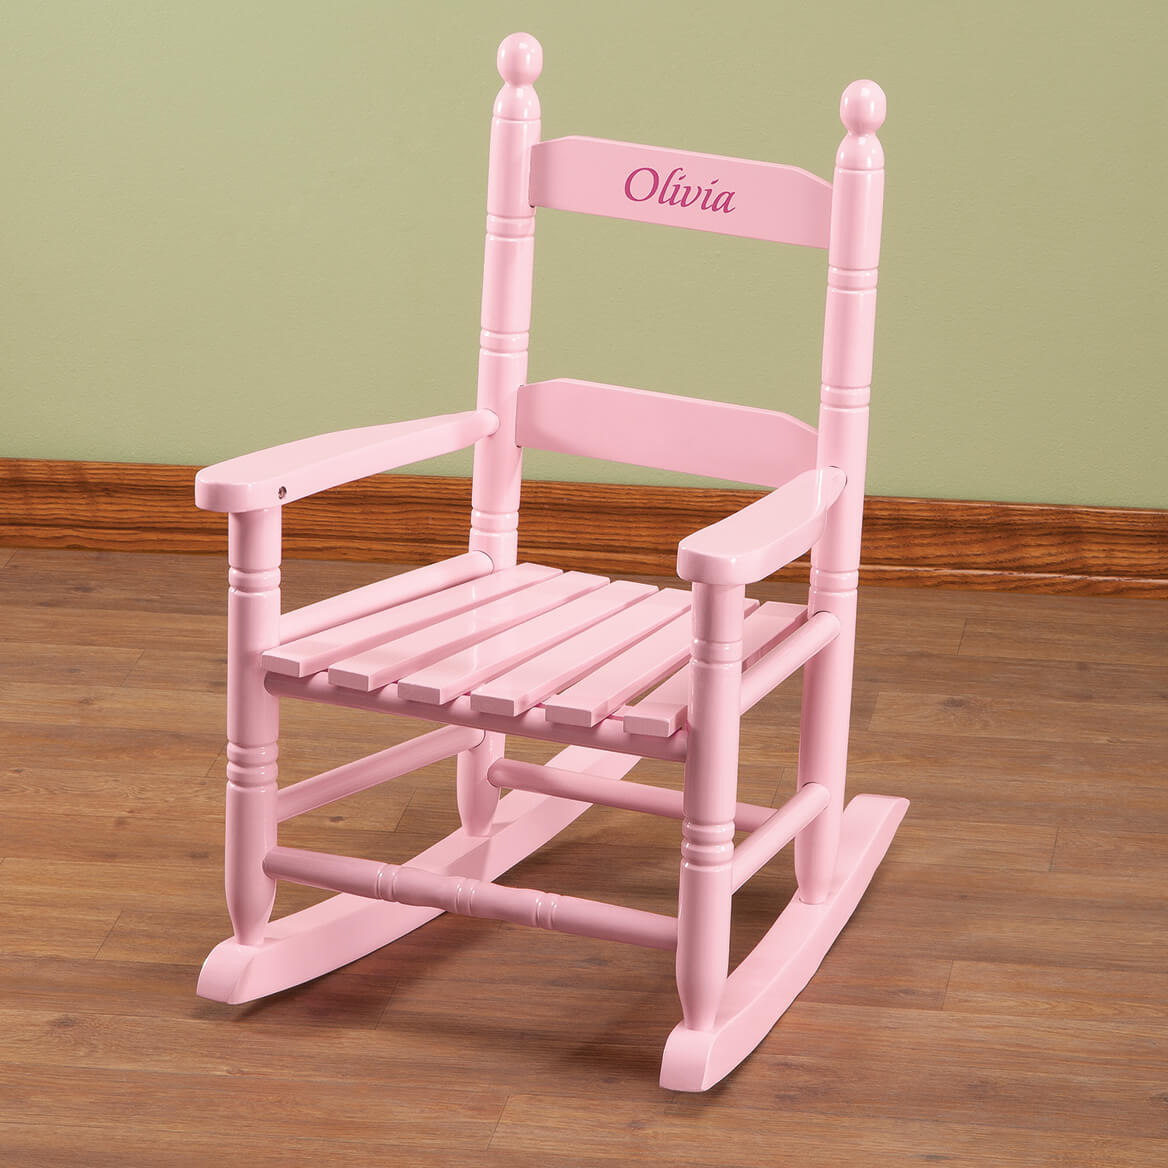 Personalized Kids Rocking Chair
 Personalized Pink Children s Rocker Children s Rocking